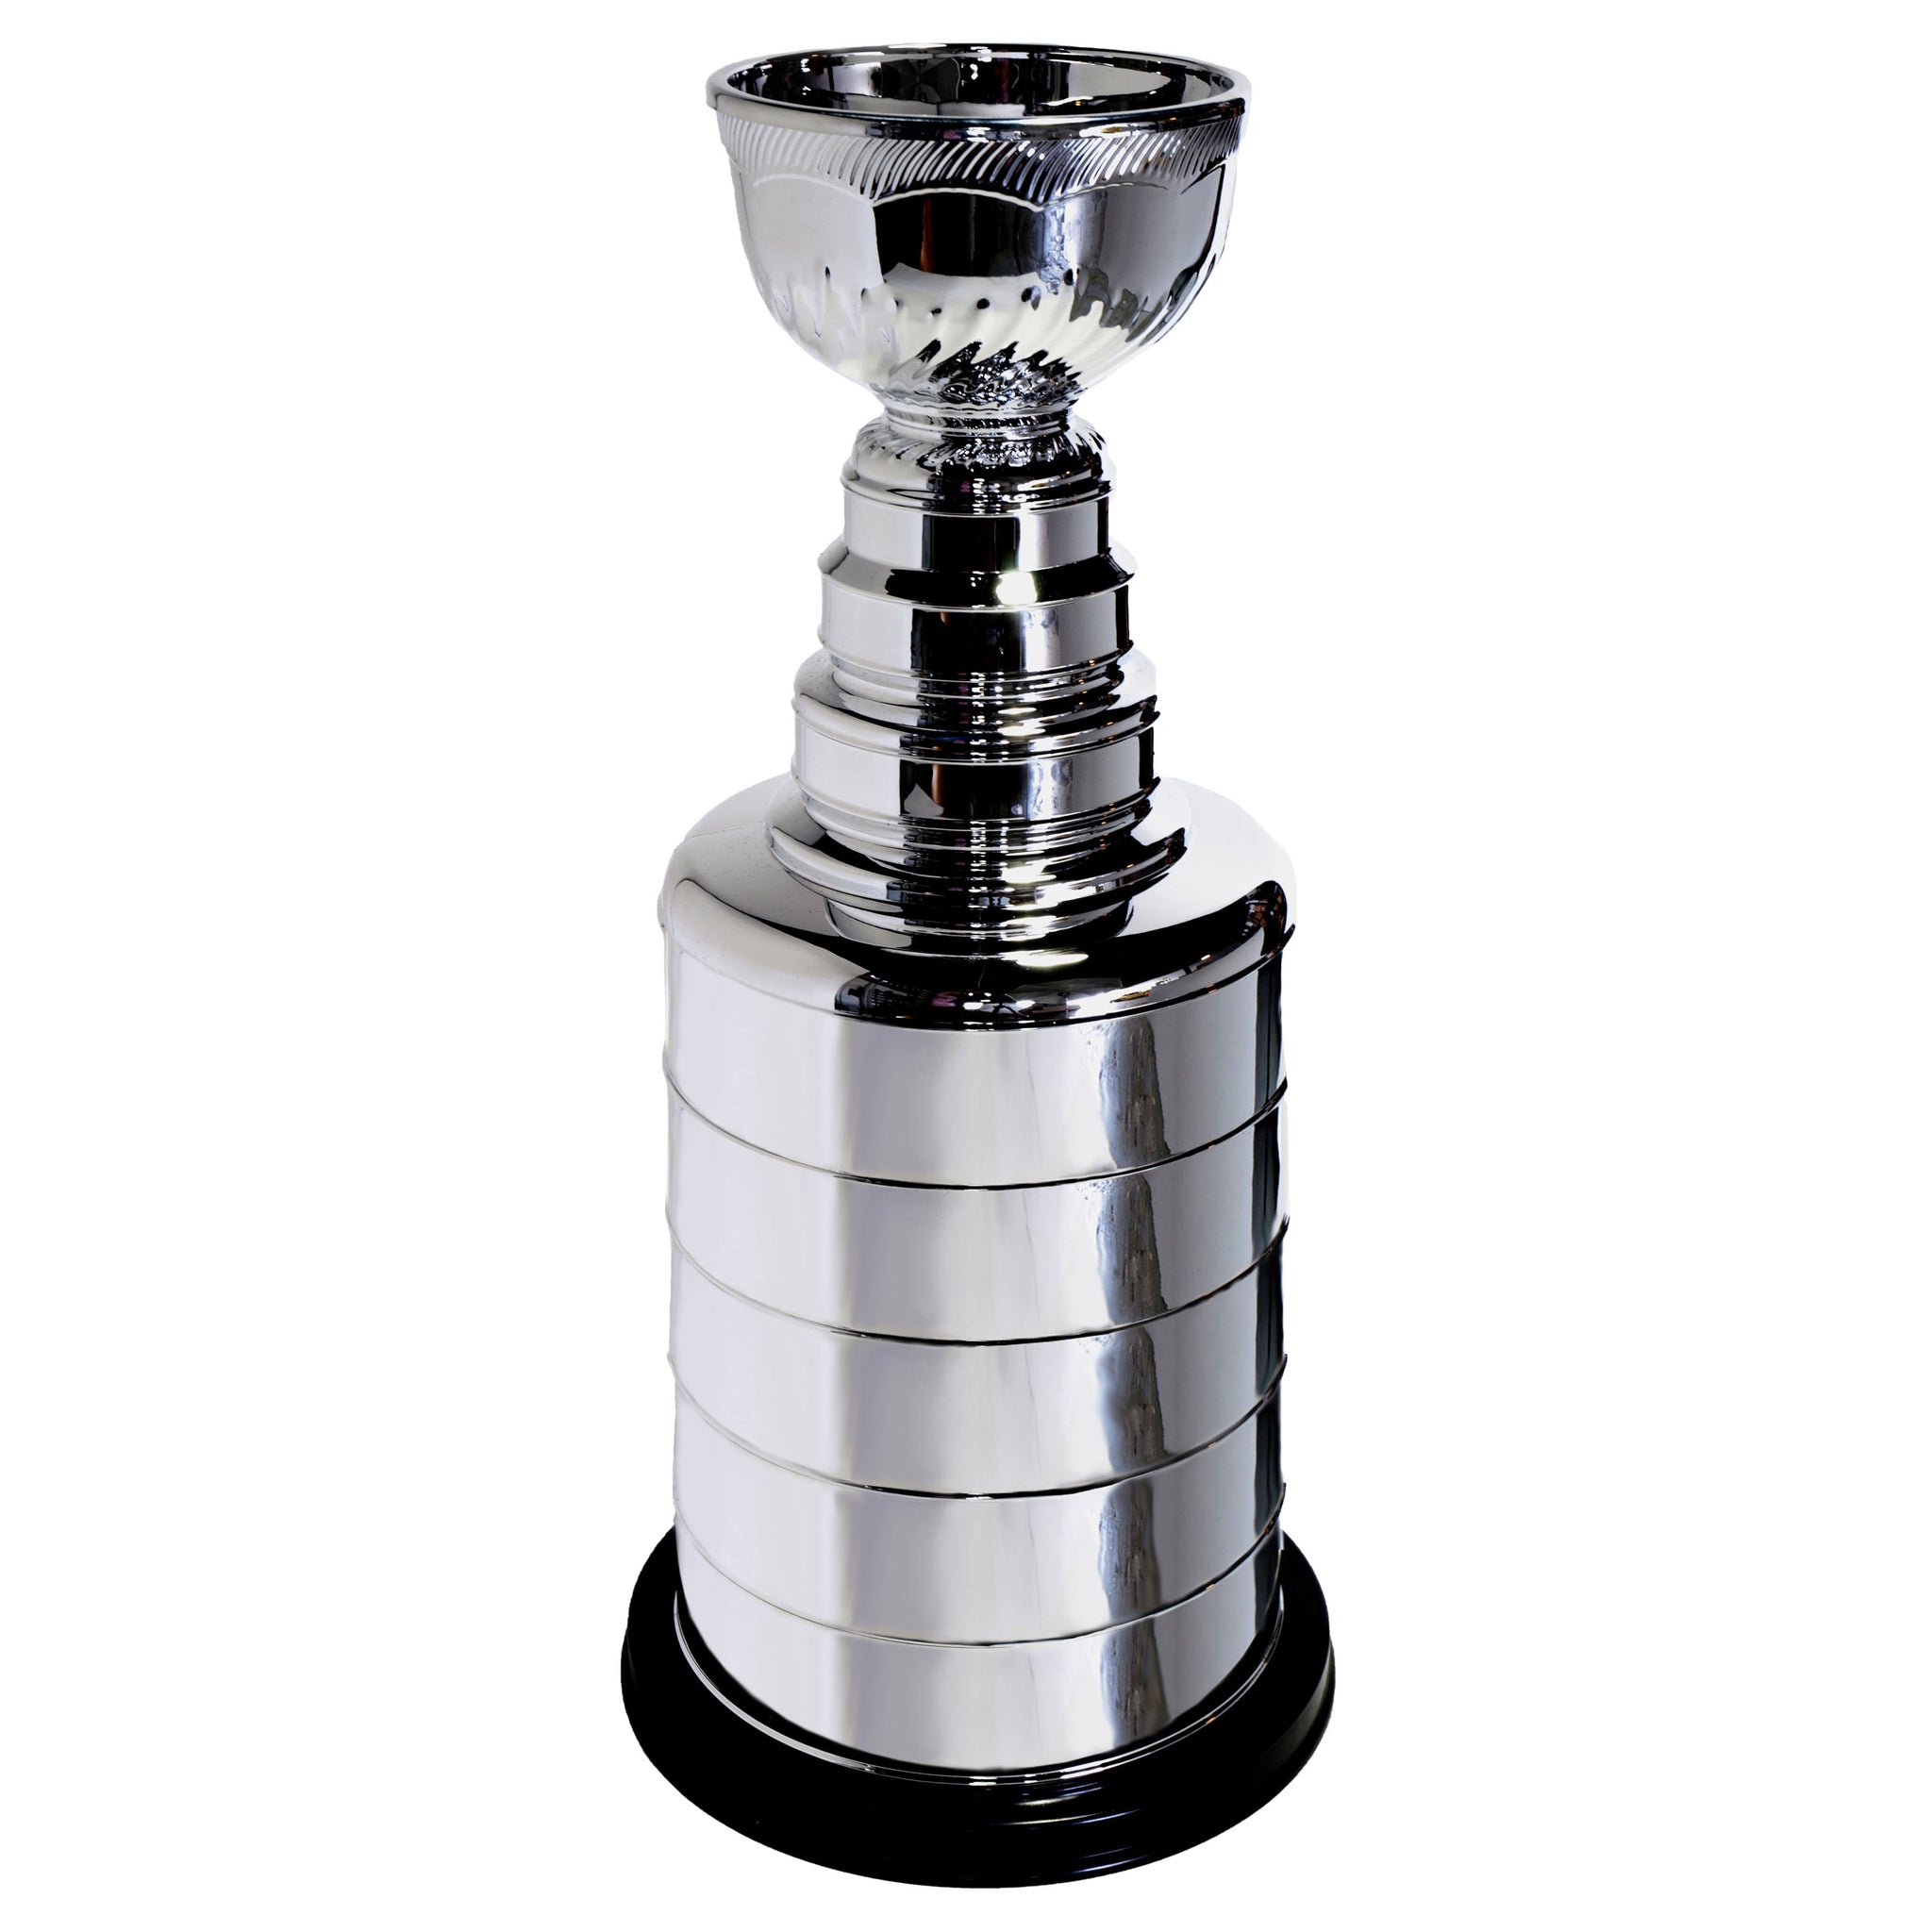 NHL Officially Licensed 25 Replica Stanley Cup Trophy – UPI Marketing, Inc.